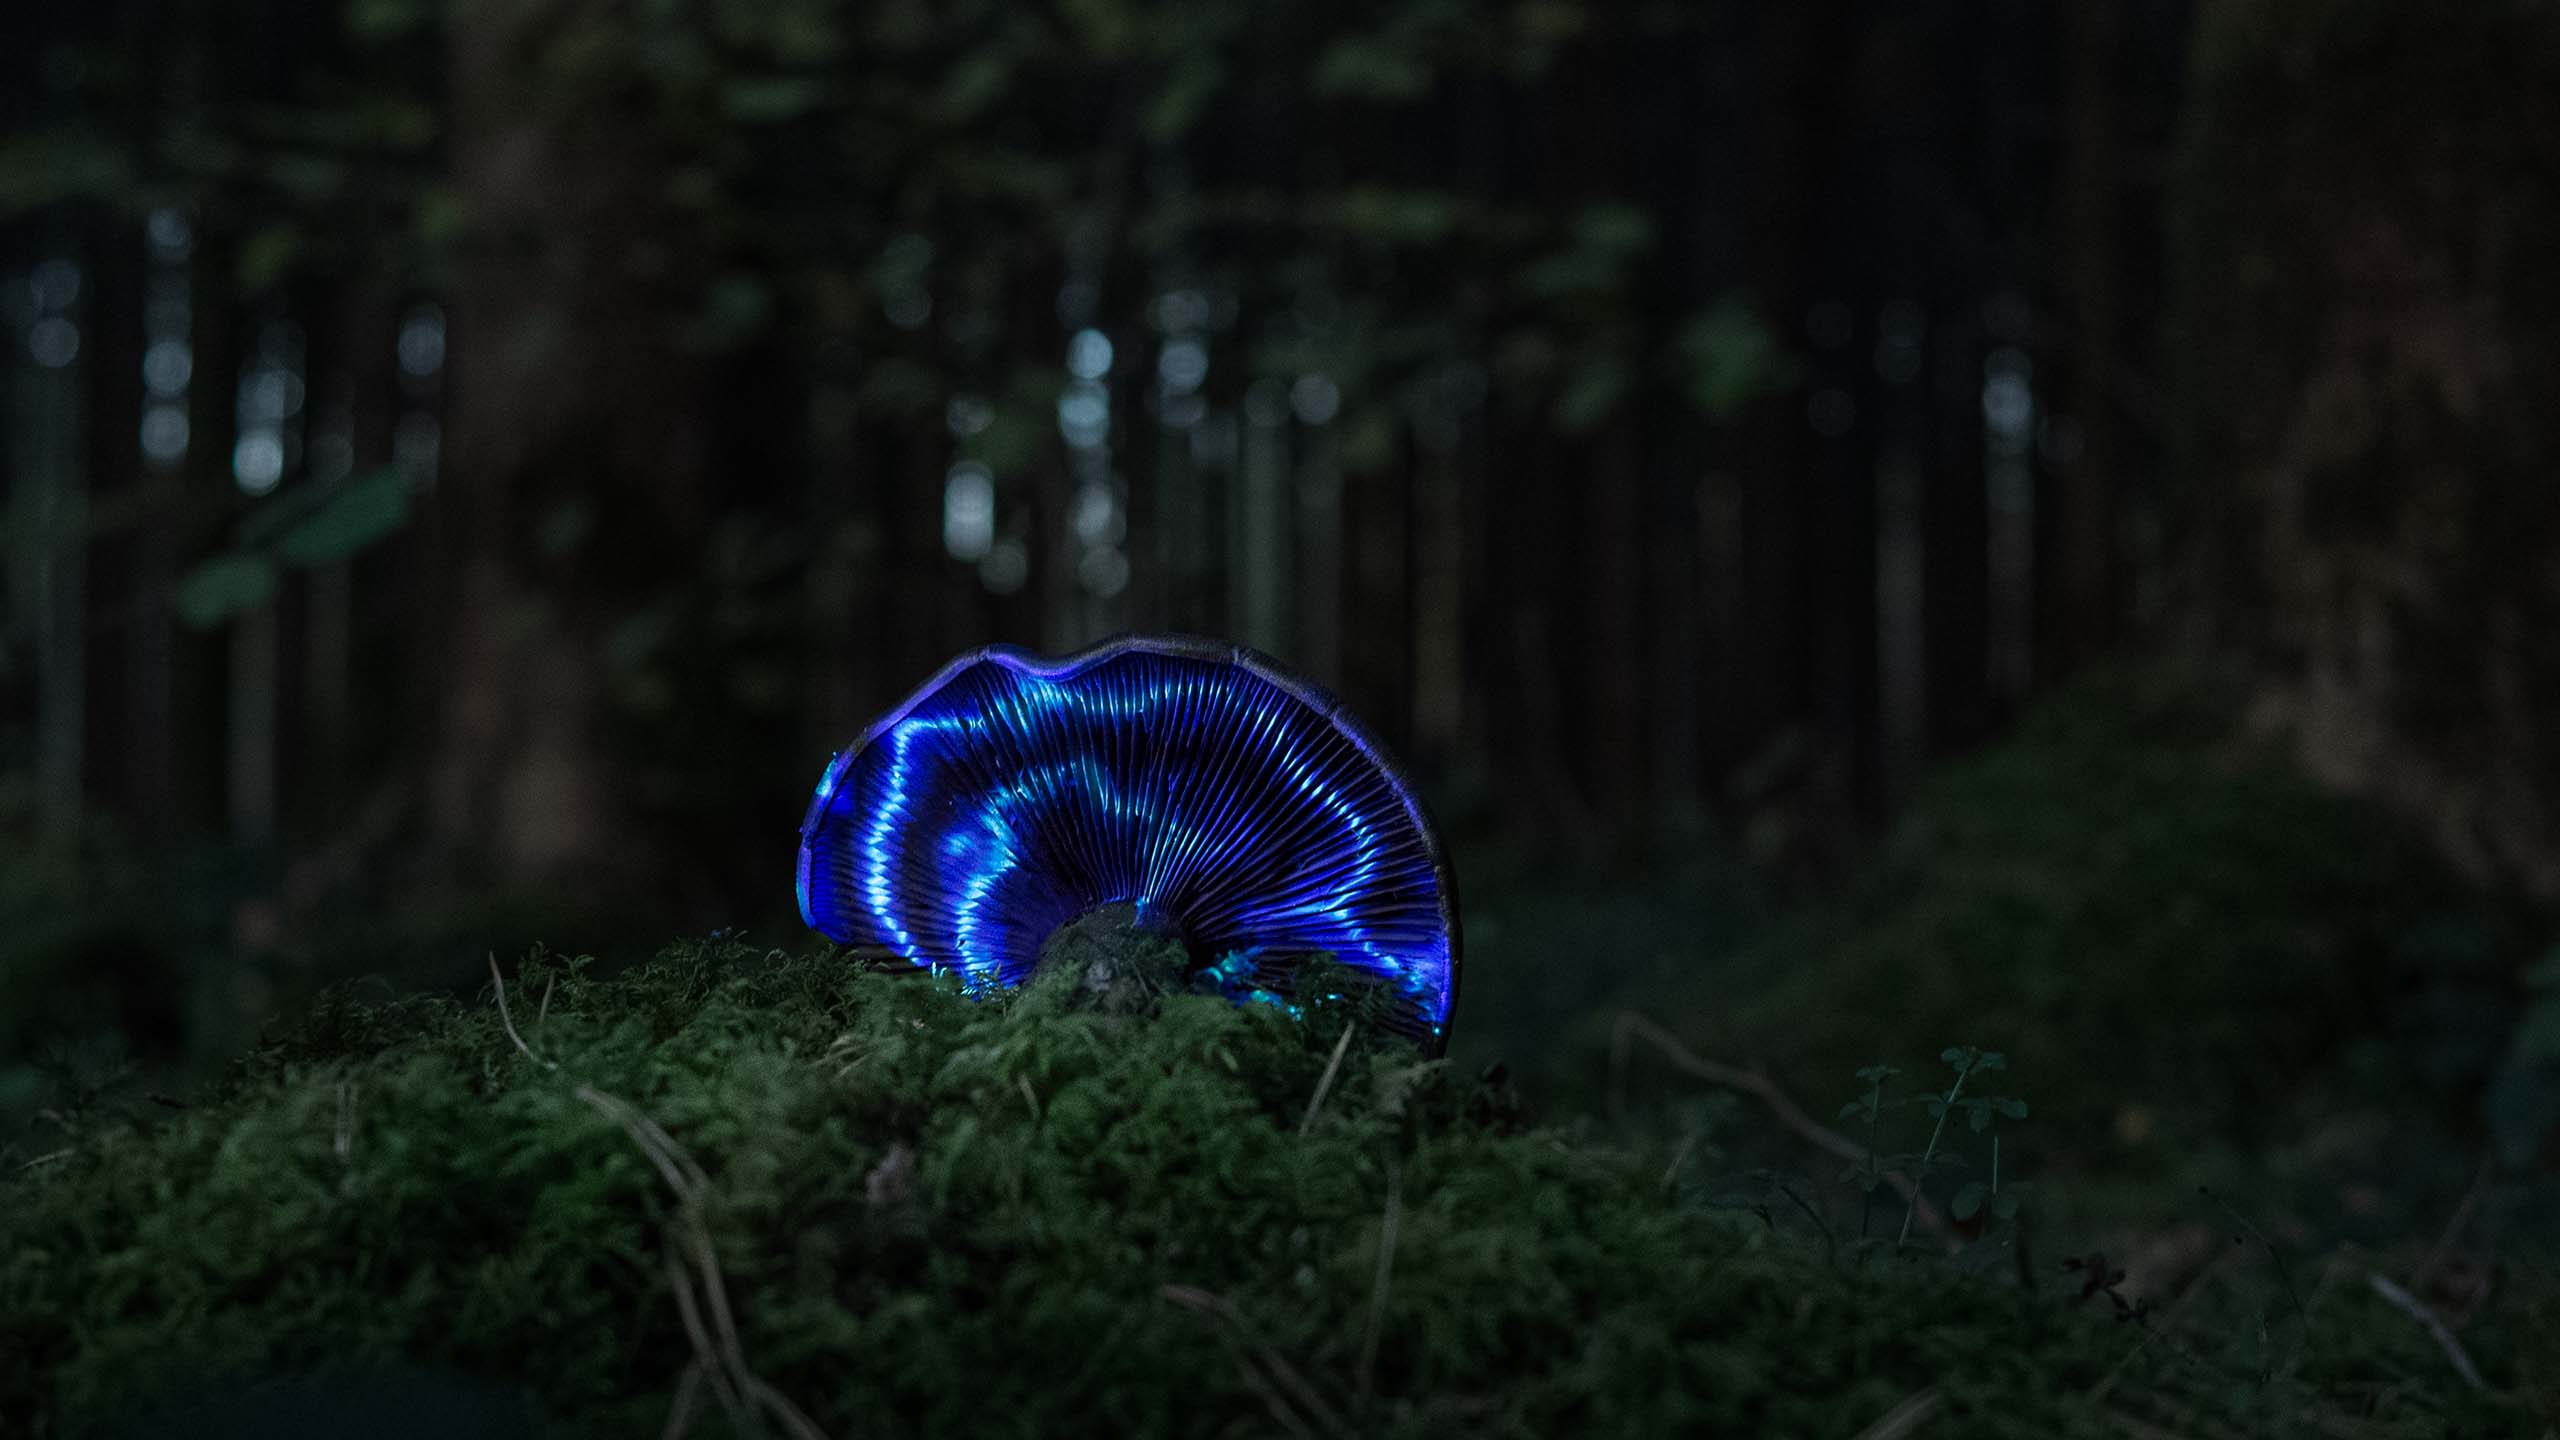 Video with blue geometric pattern projected onto a Mushroom in a forest